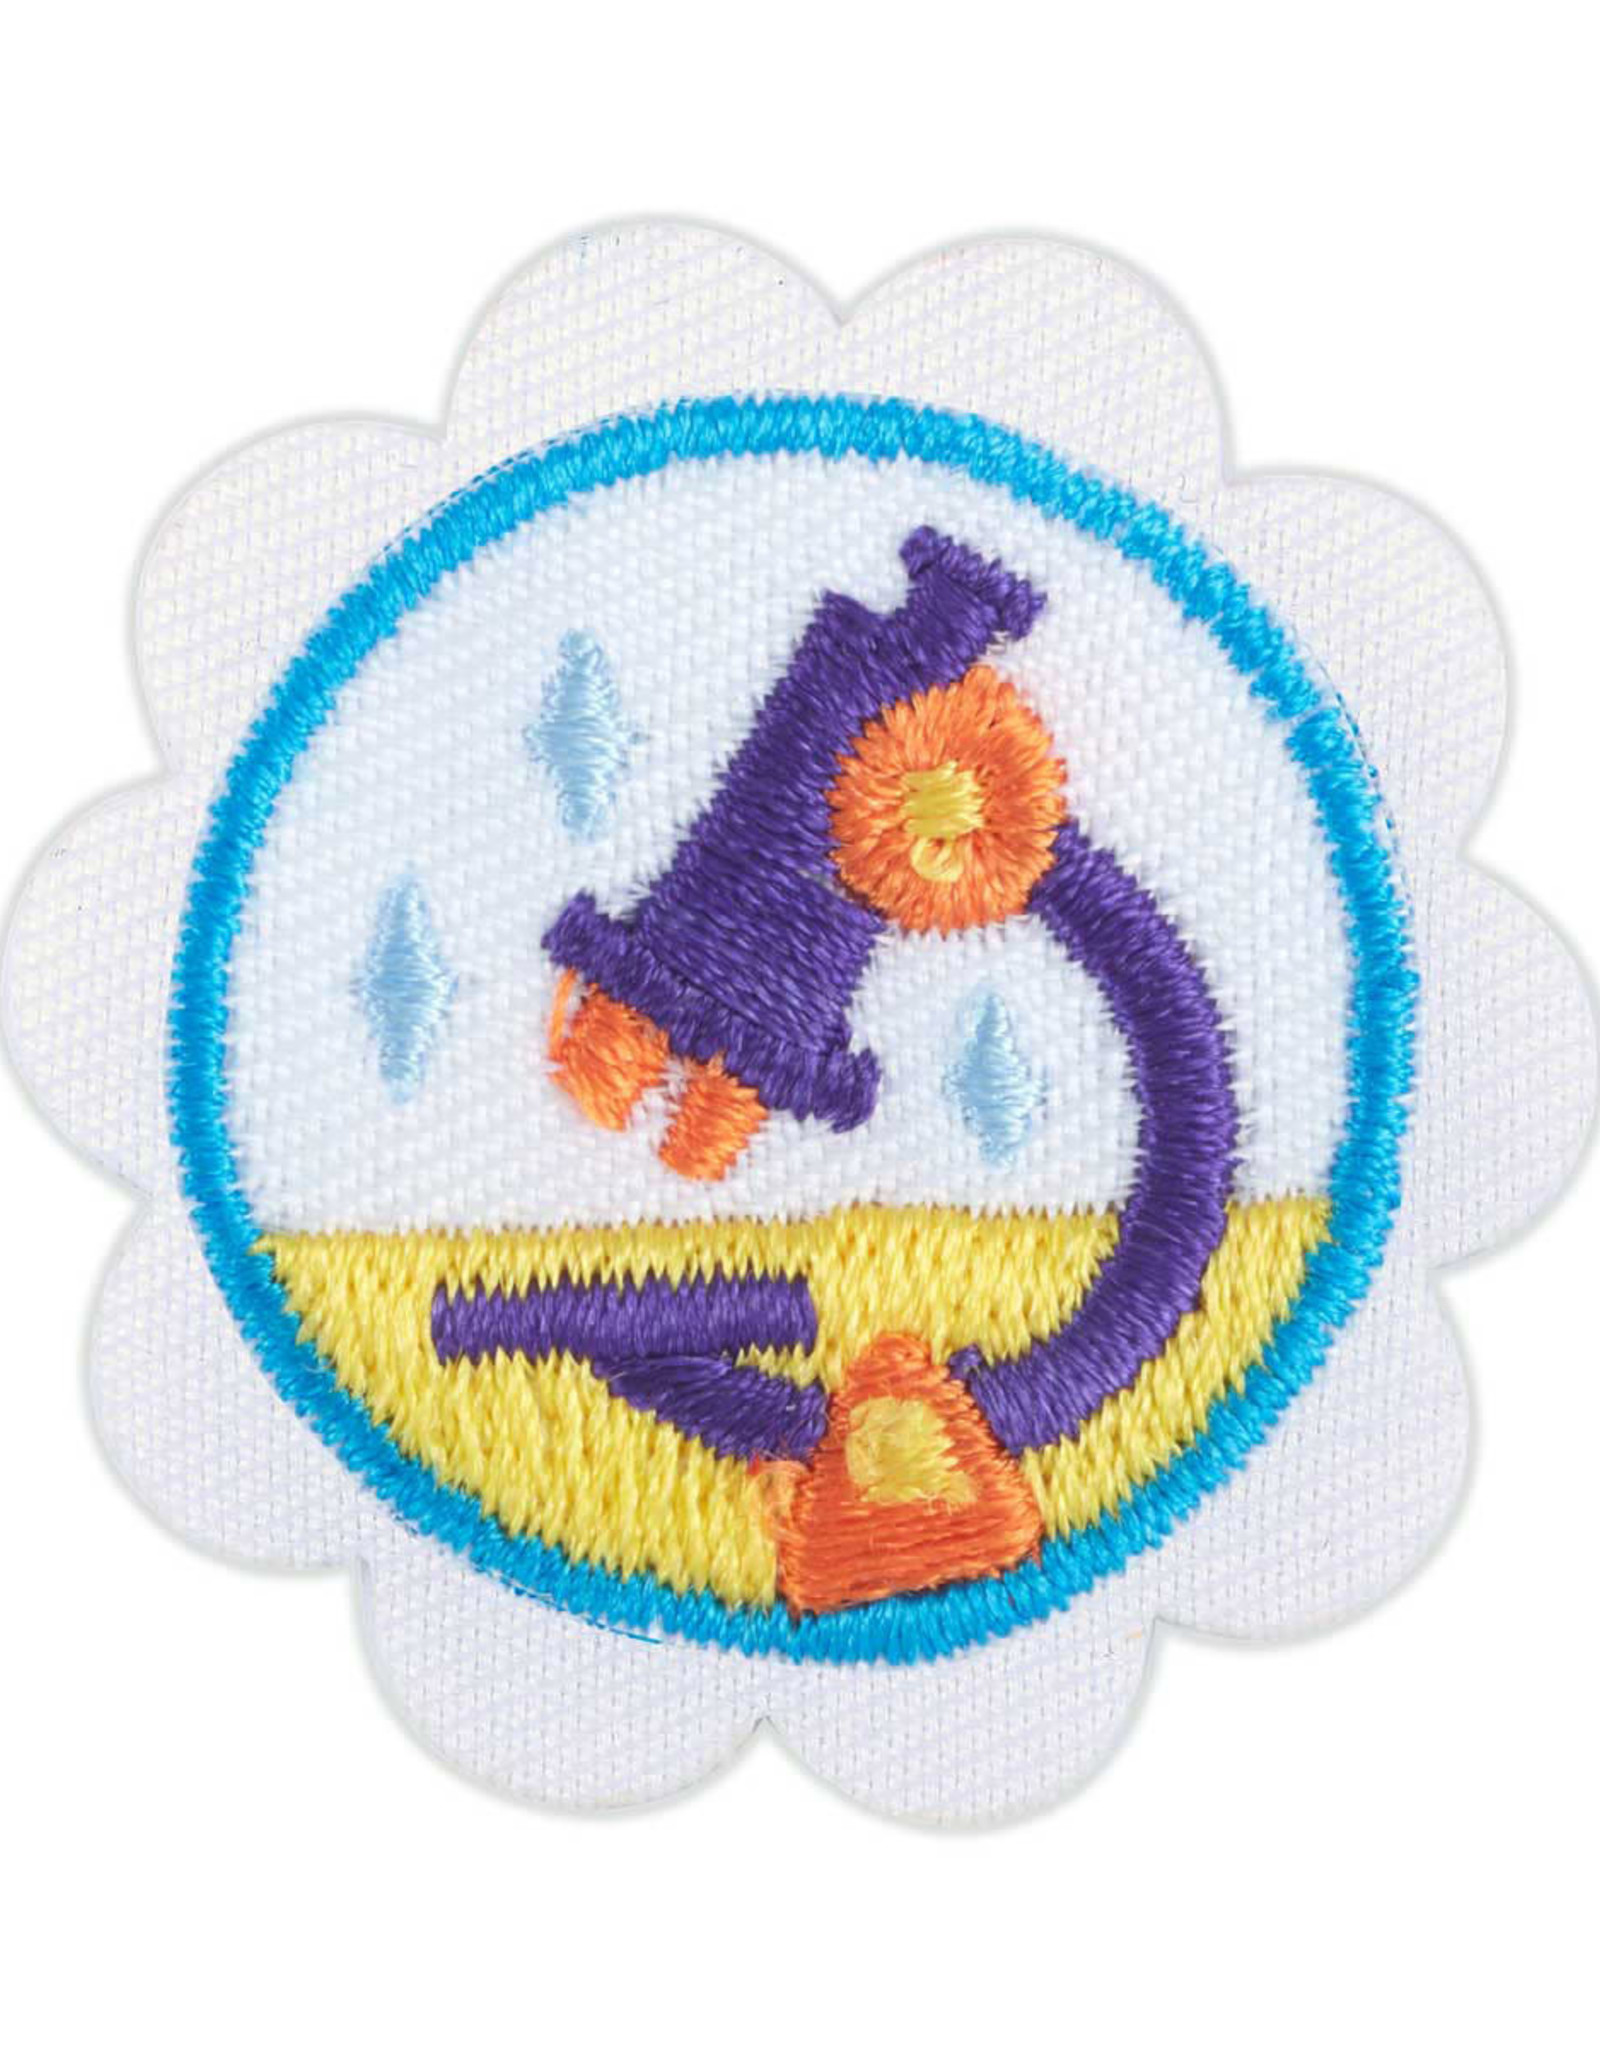 GIRL SCOUTS OF THE USA Daisy STEM Career Exploration Badge